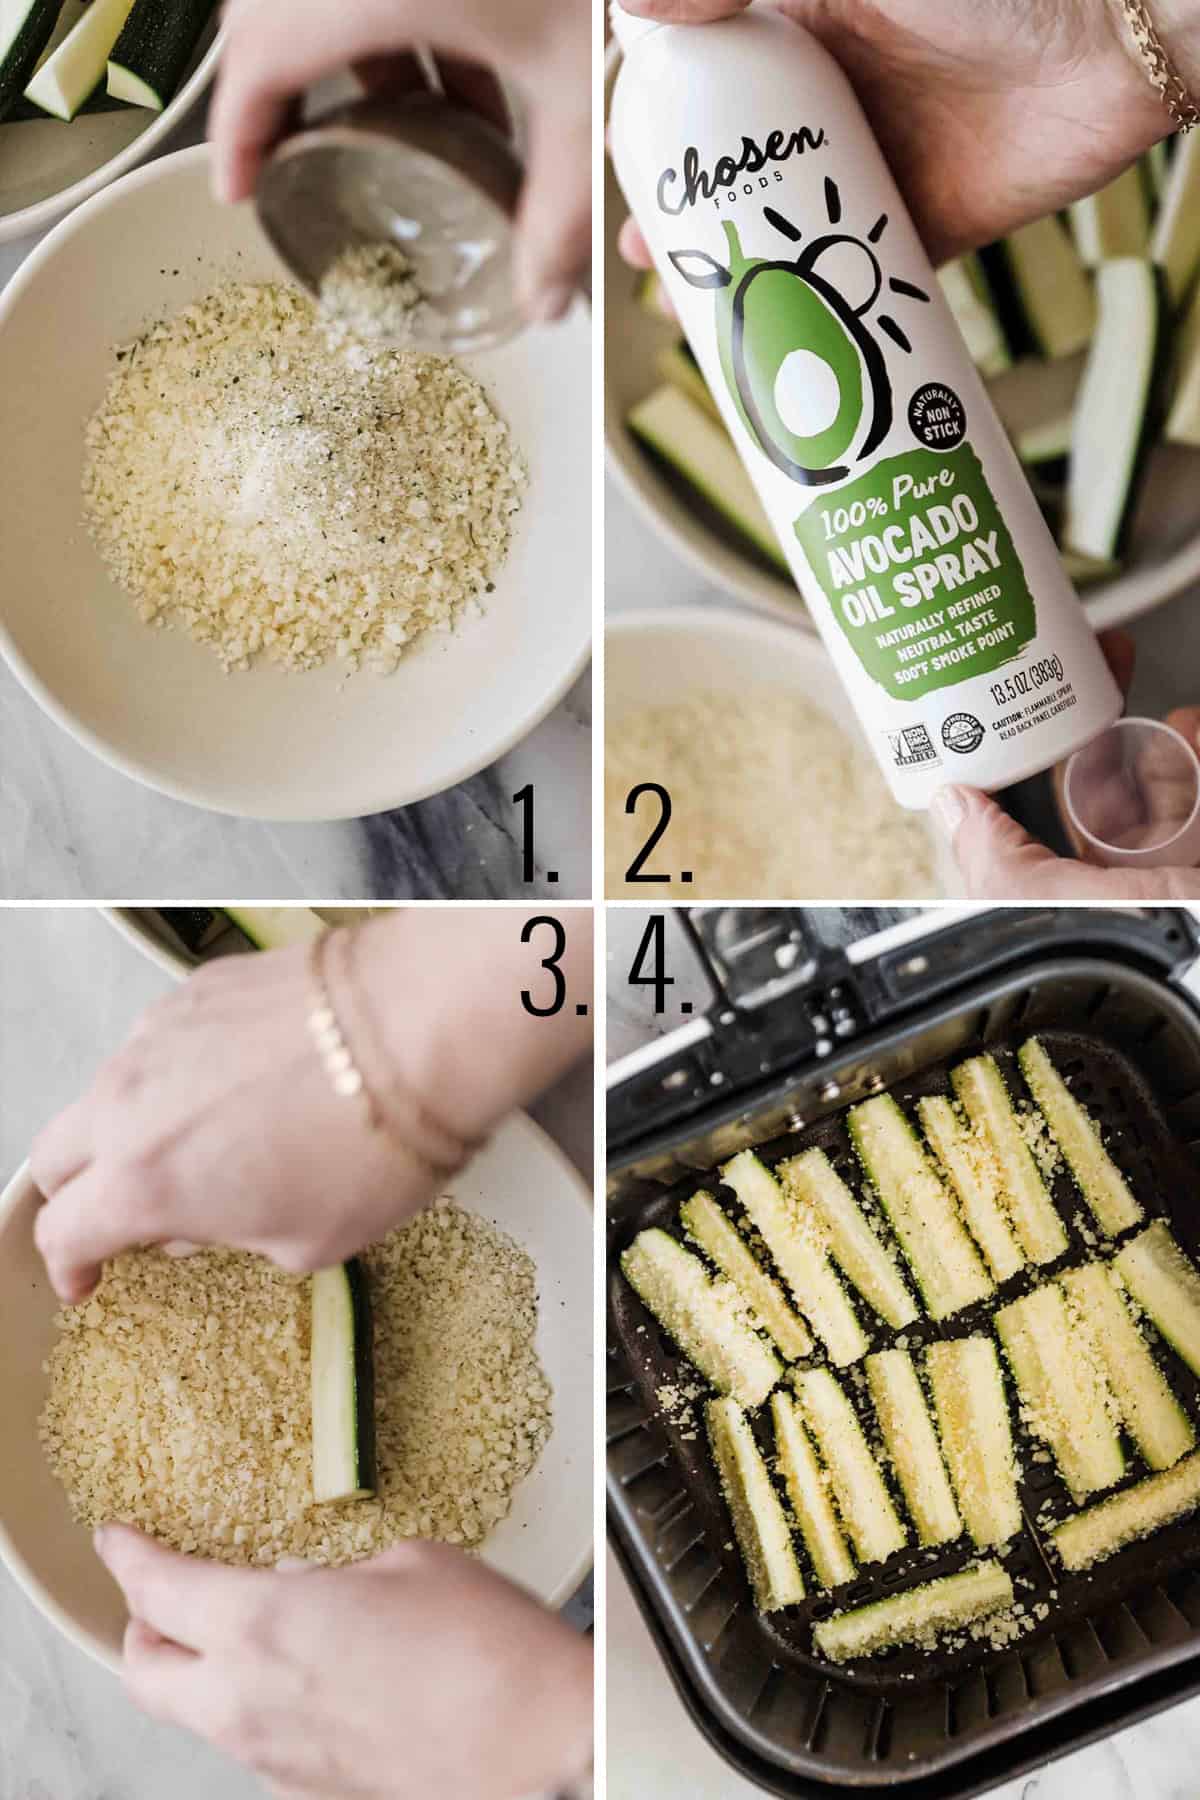 A collage of images showing the steps for making air fryer zucchini.